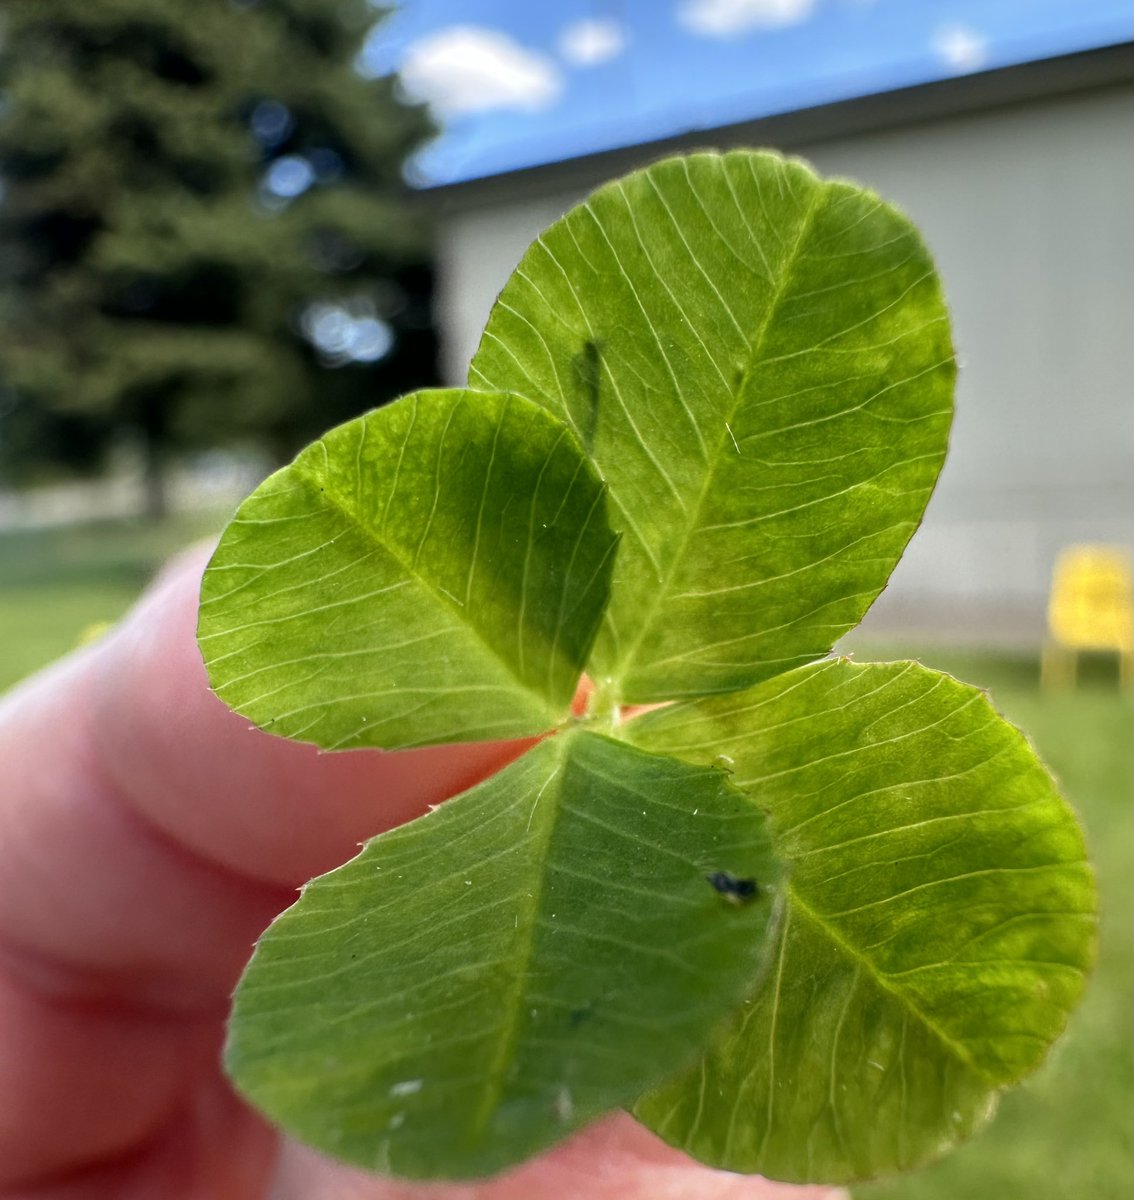 I found my first ever 4 leaf clover today! 🍀